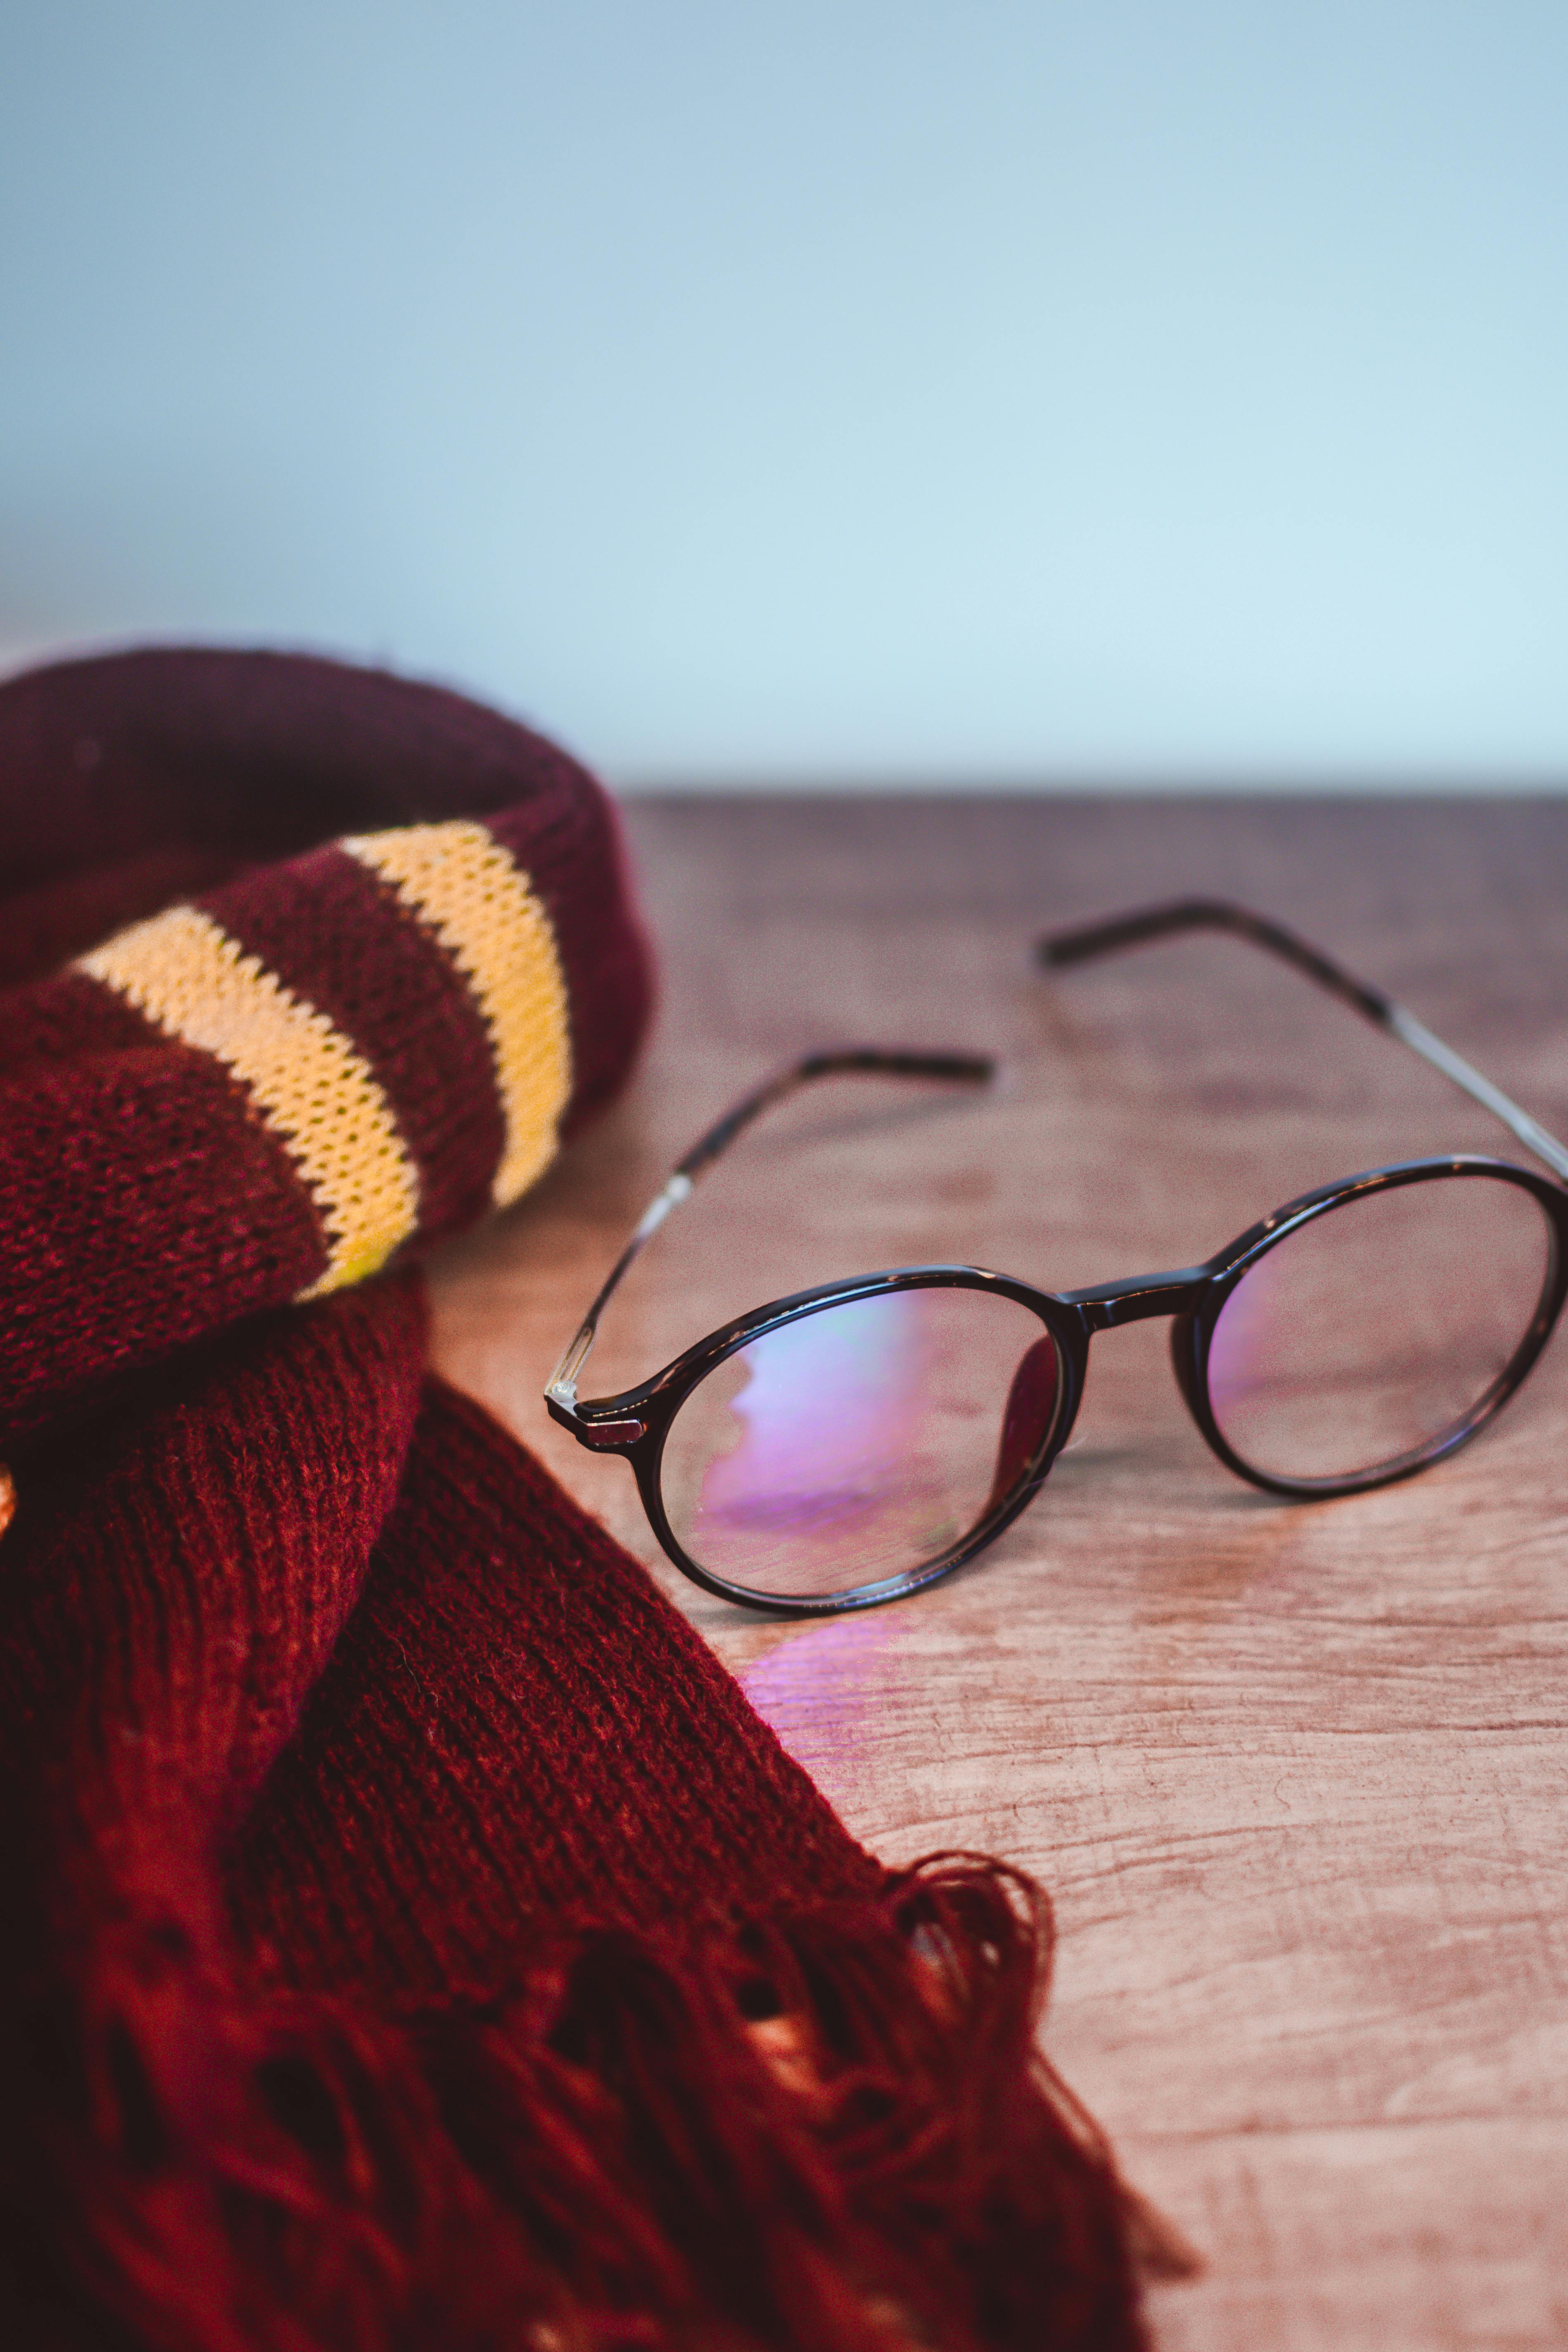 scarf and eyeglasses on the table